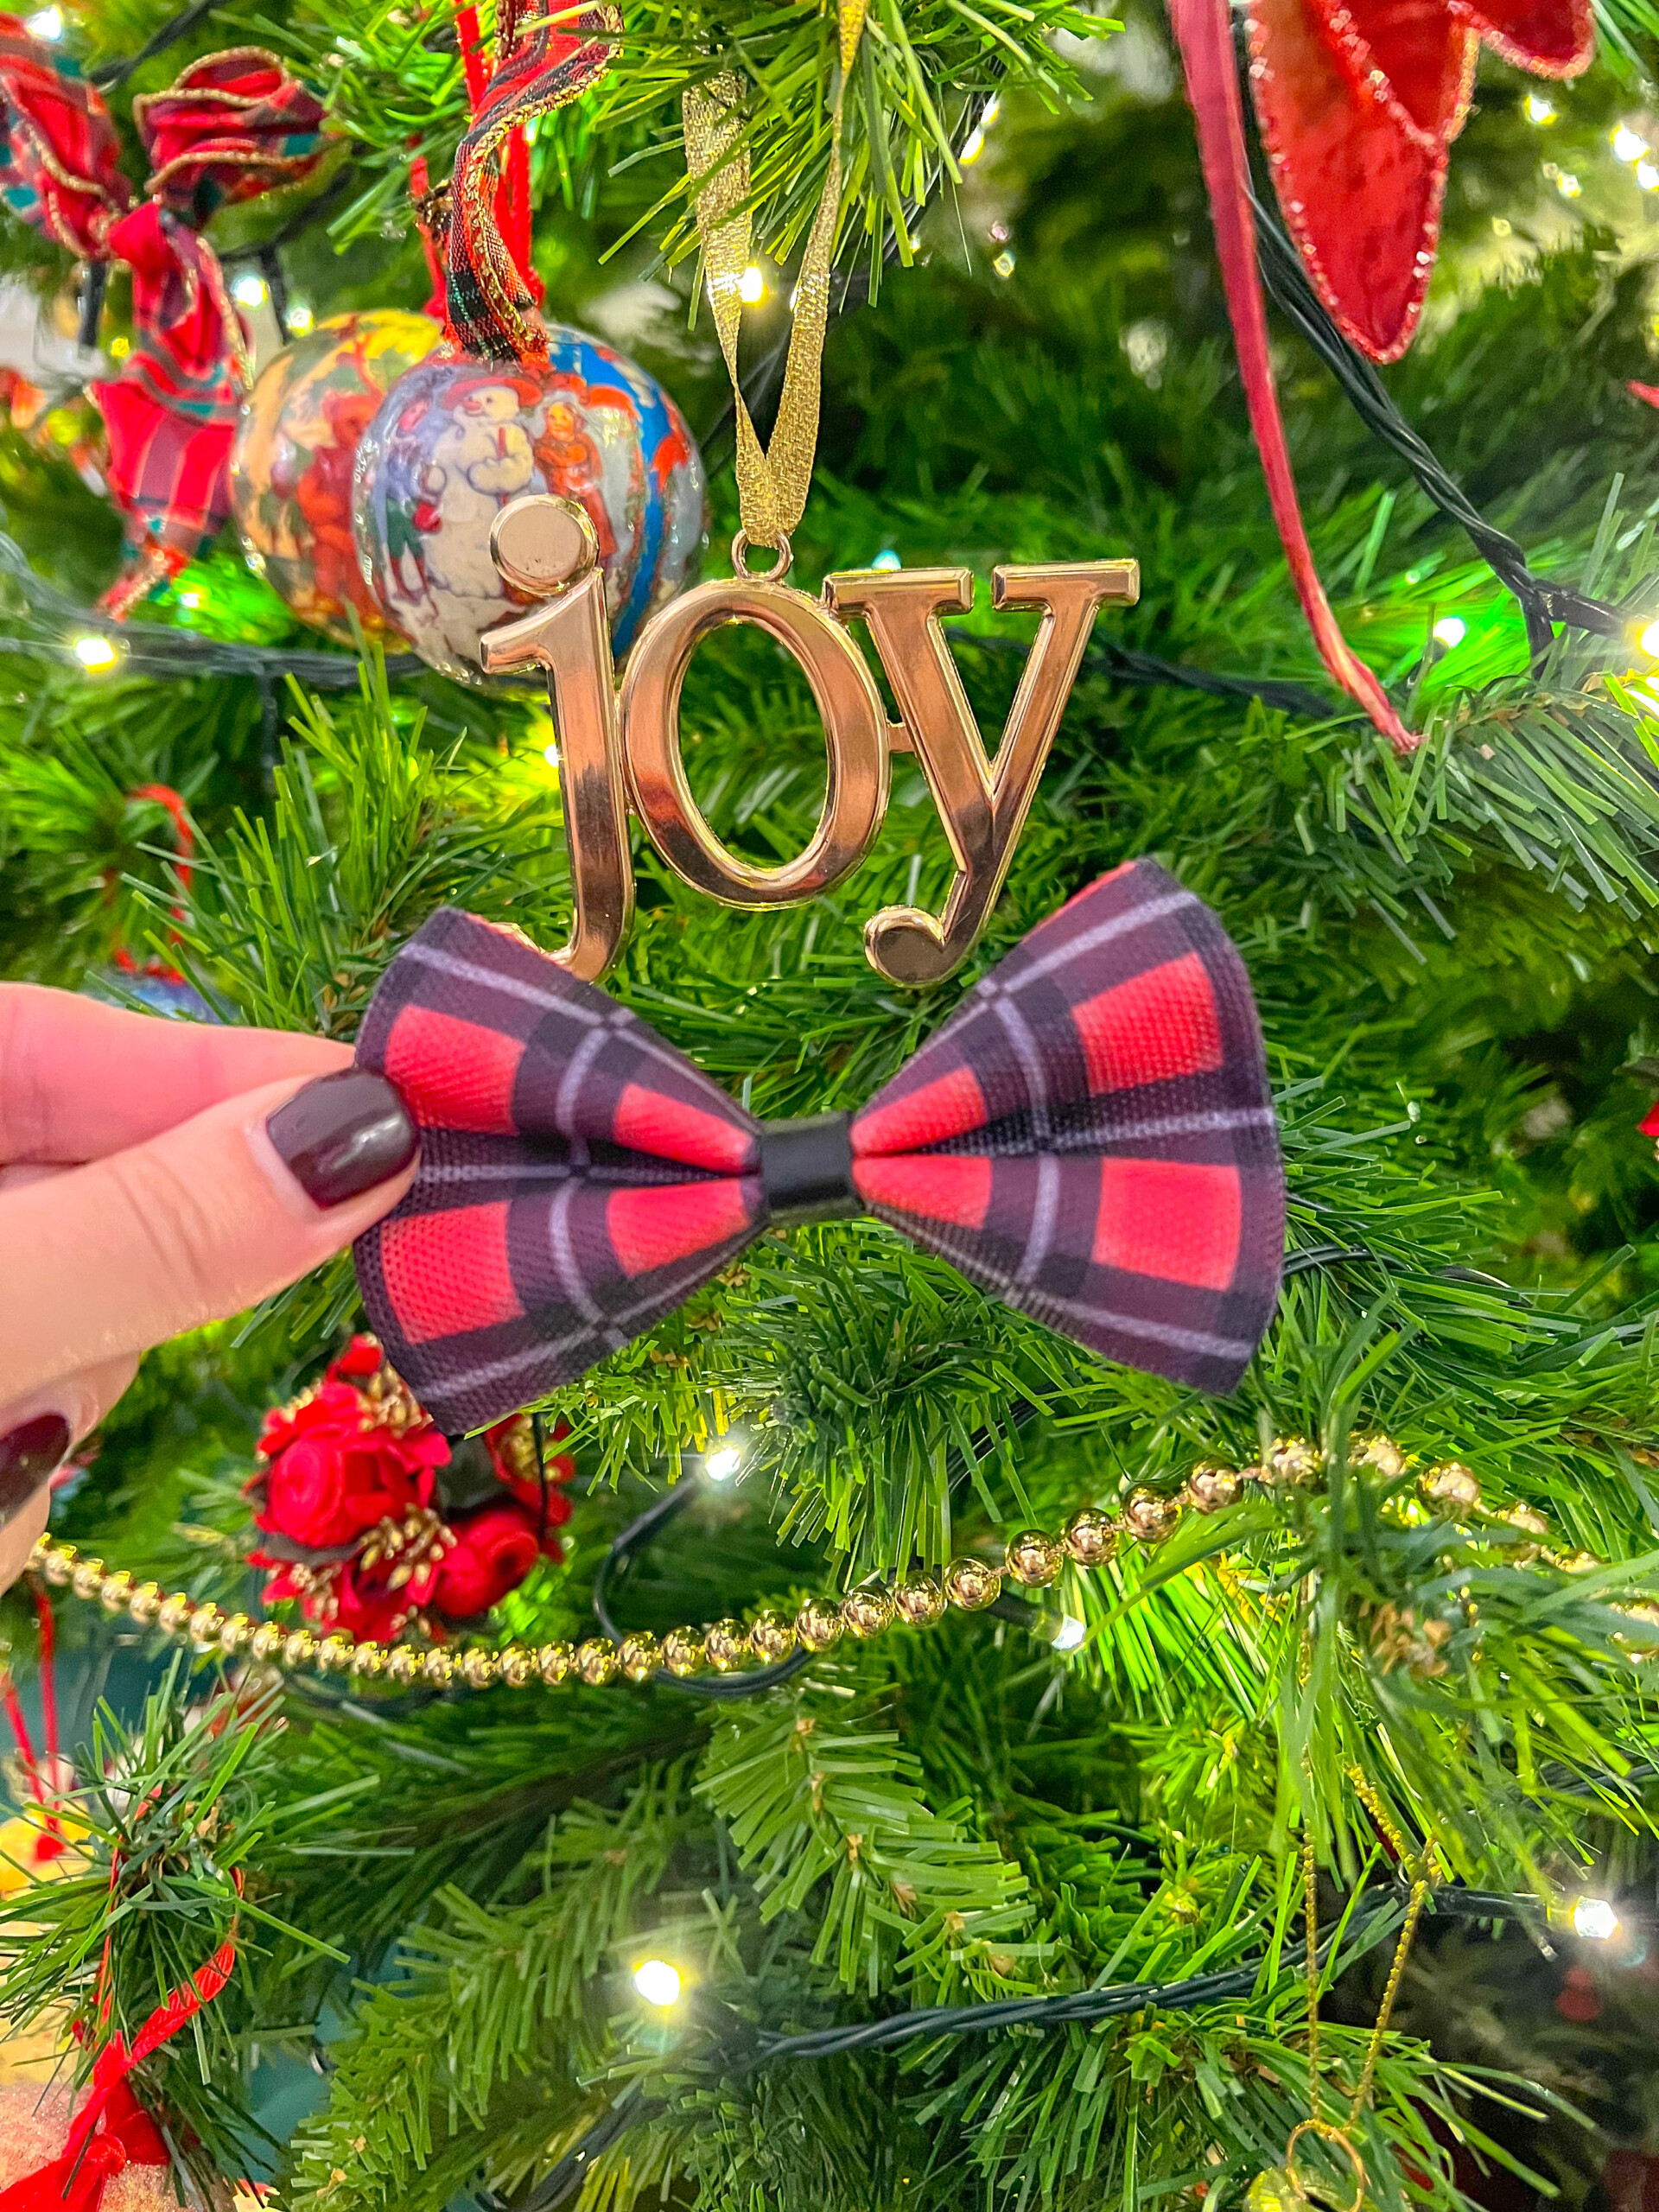 A winter dog bow tie, in a festive red checked pattern, placed on a Christmas tree amongst decorations.